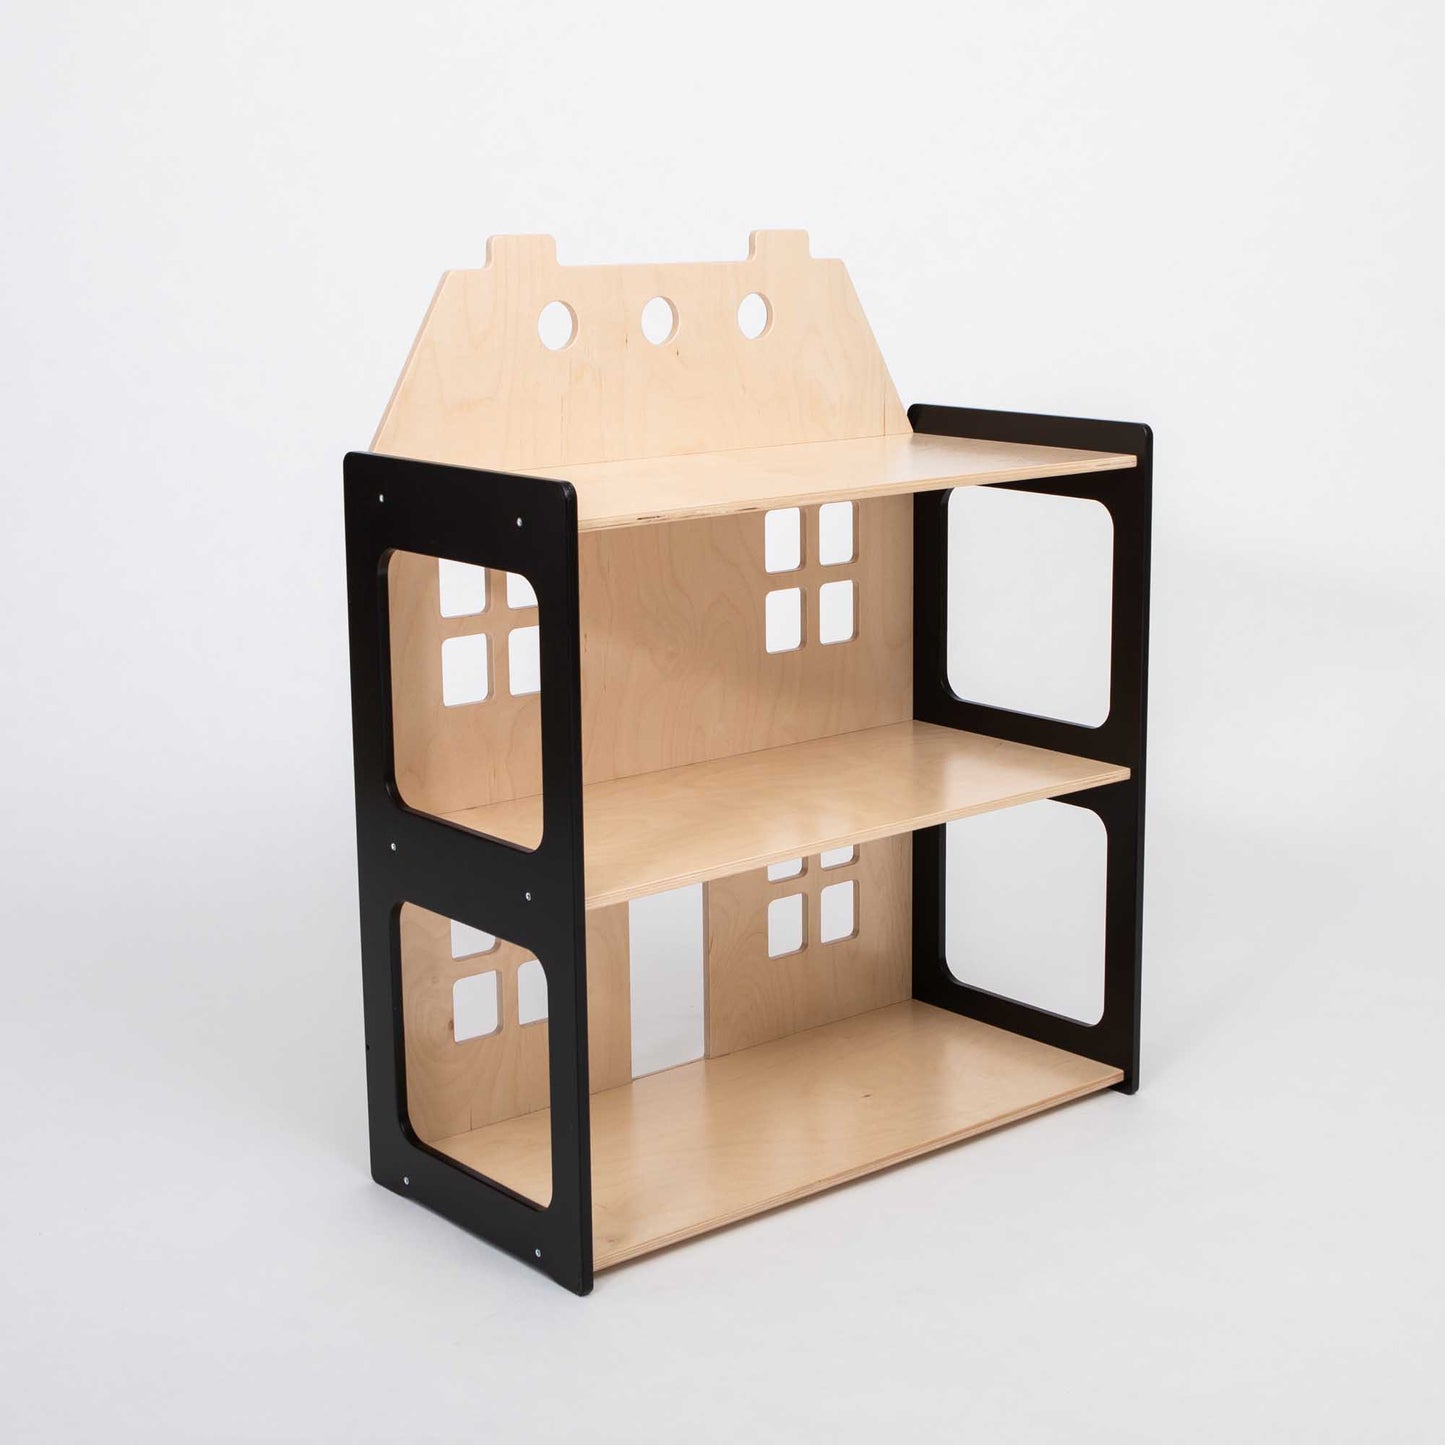 A Sweet Home From Wood 2-in-1 doll house and Montessori shelf with a house on it.